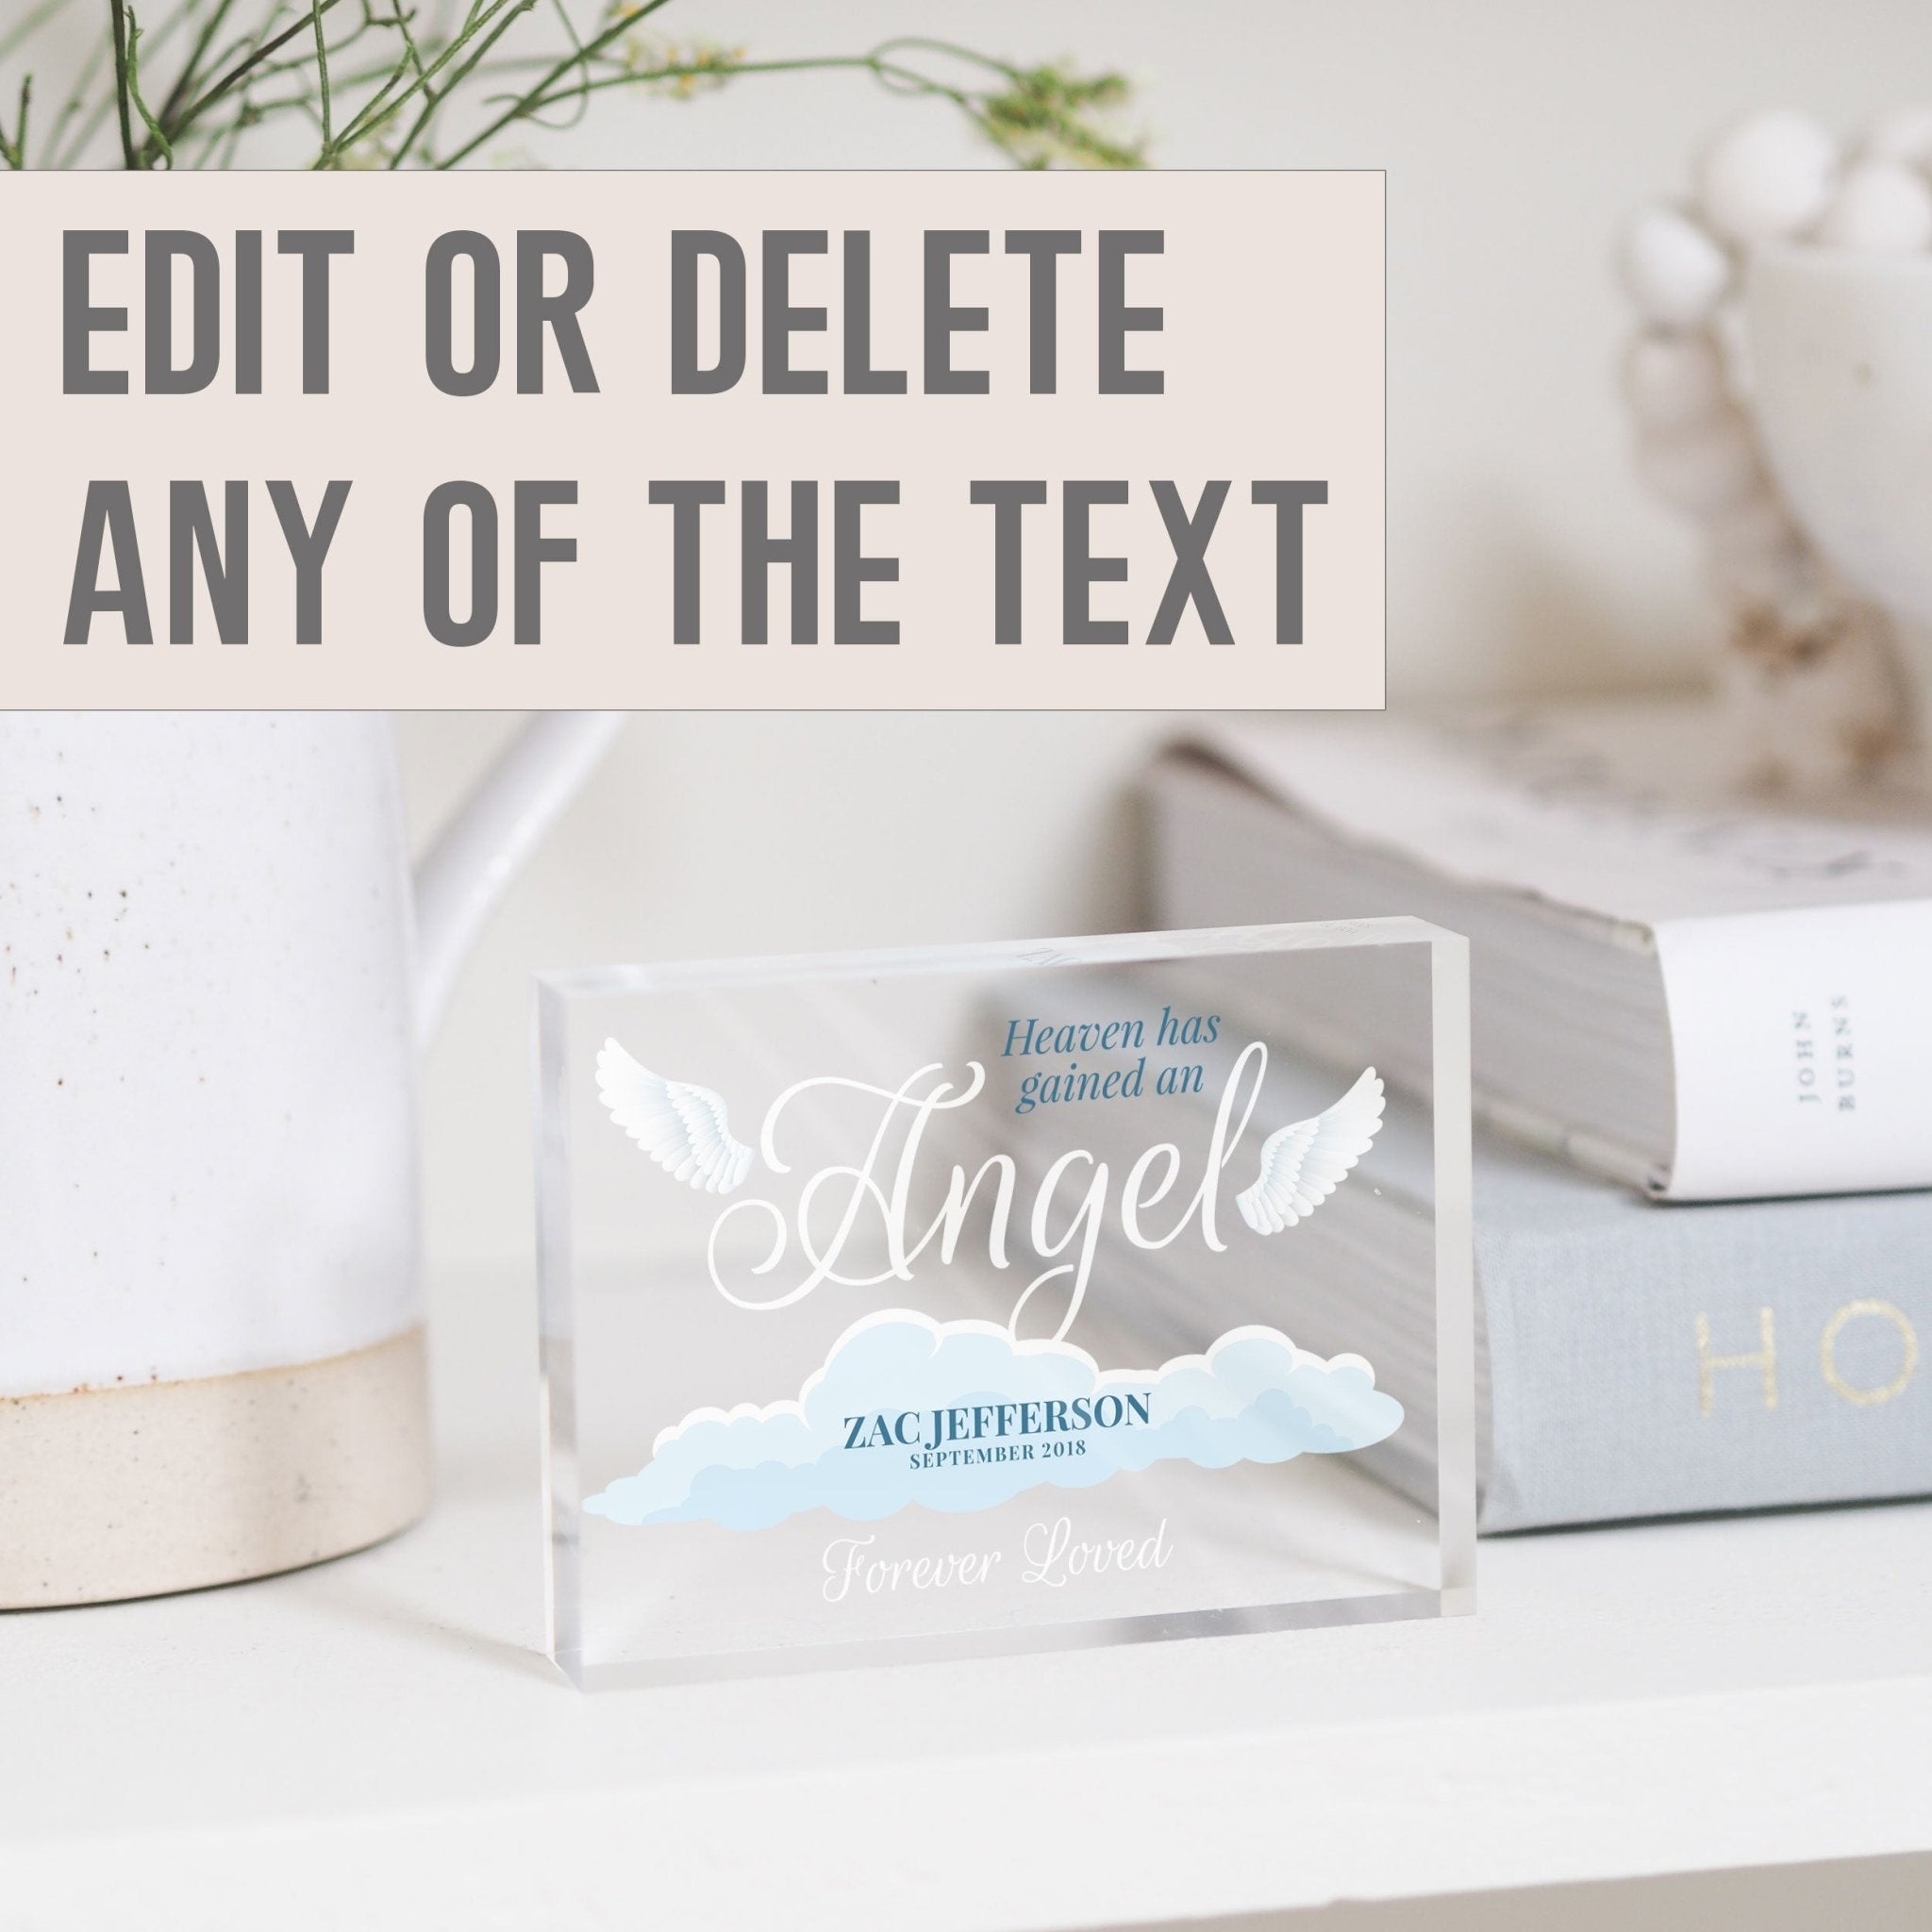 Miscarriage Keepsake | Miscarriage Gift | Baby Memorial Gift | Baby Loss Gift PhotoBlock - Unique Prints